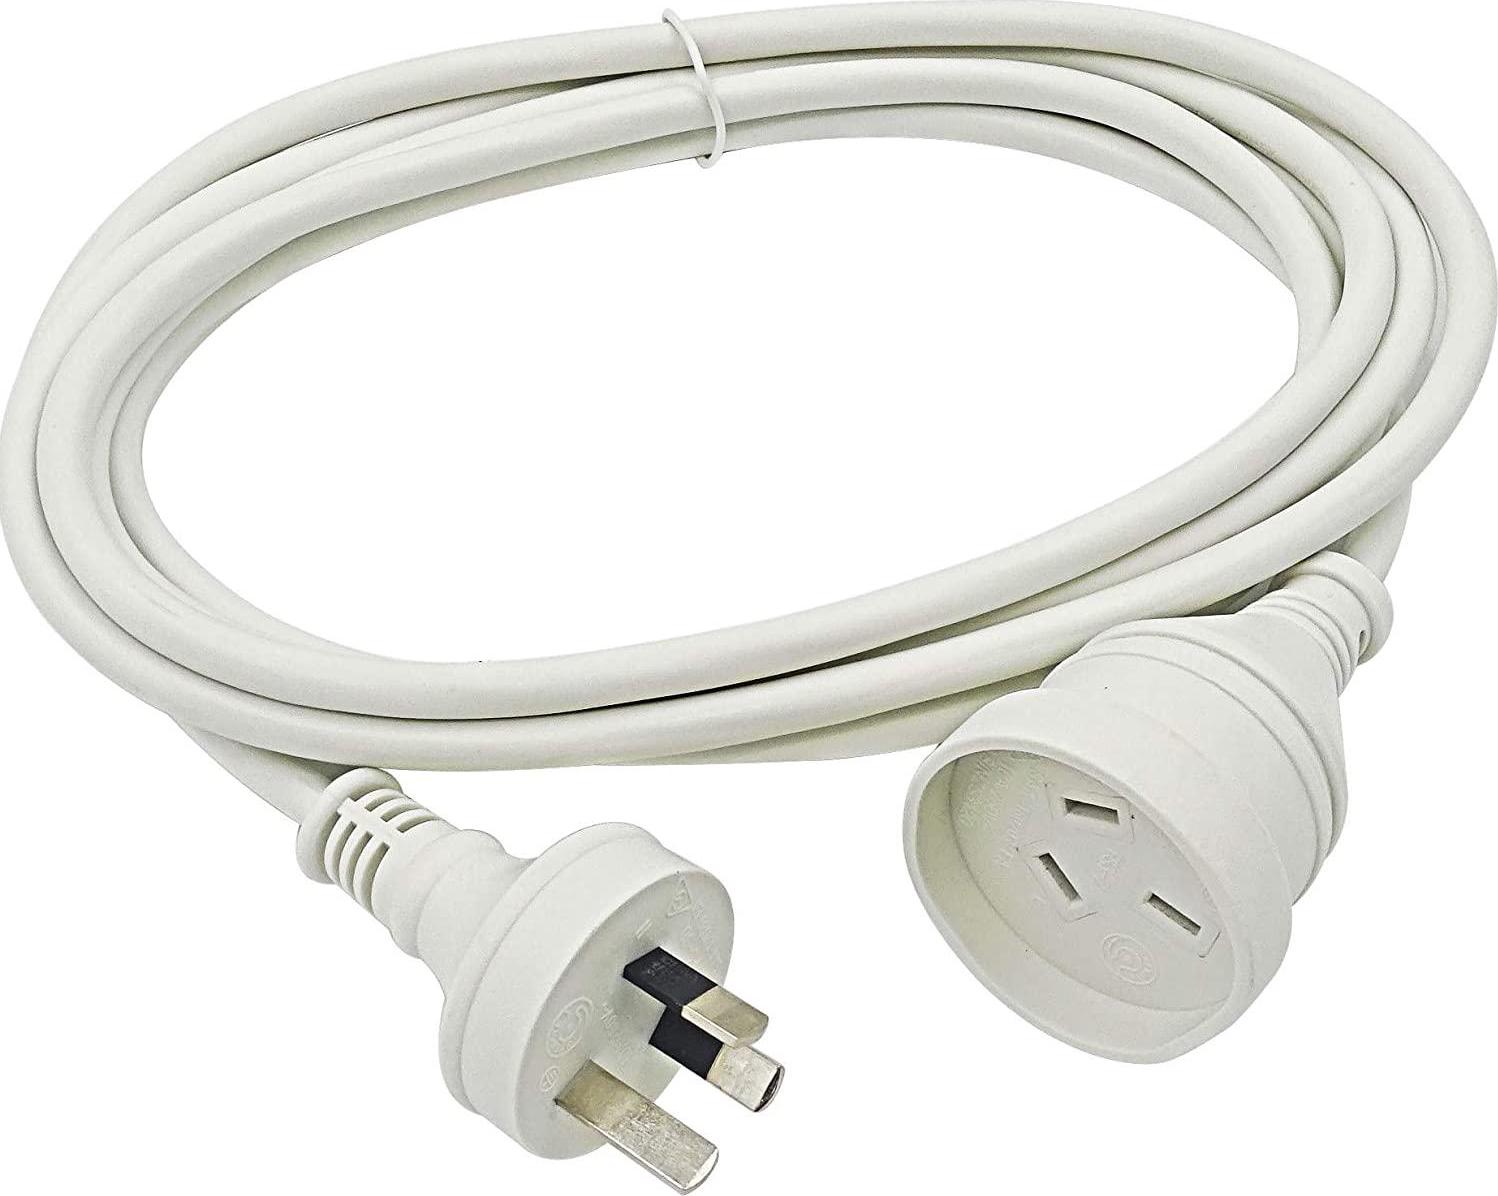 GOLINX, GOLINX 3m Power Extension Cord. 10A/240V/2400W Rated. RCM Approved. White.